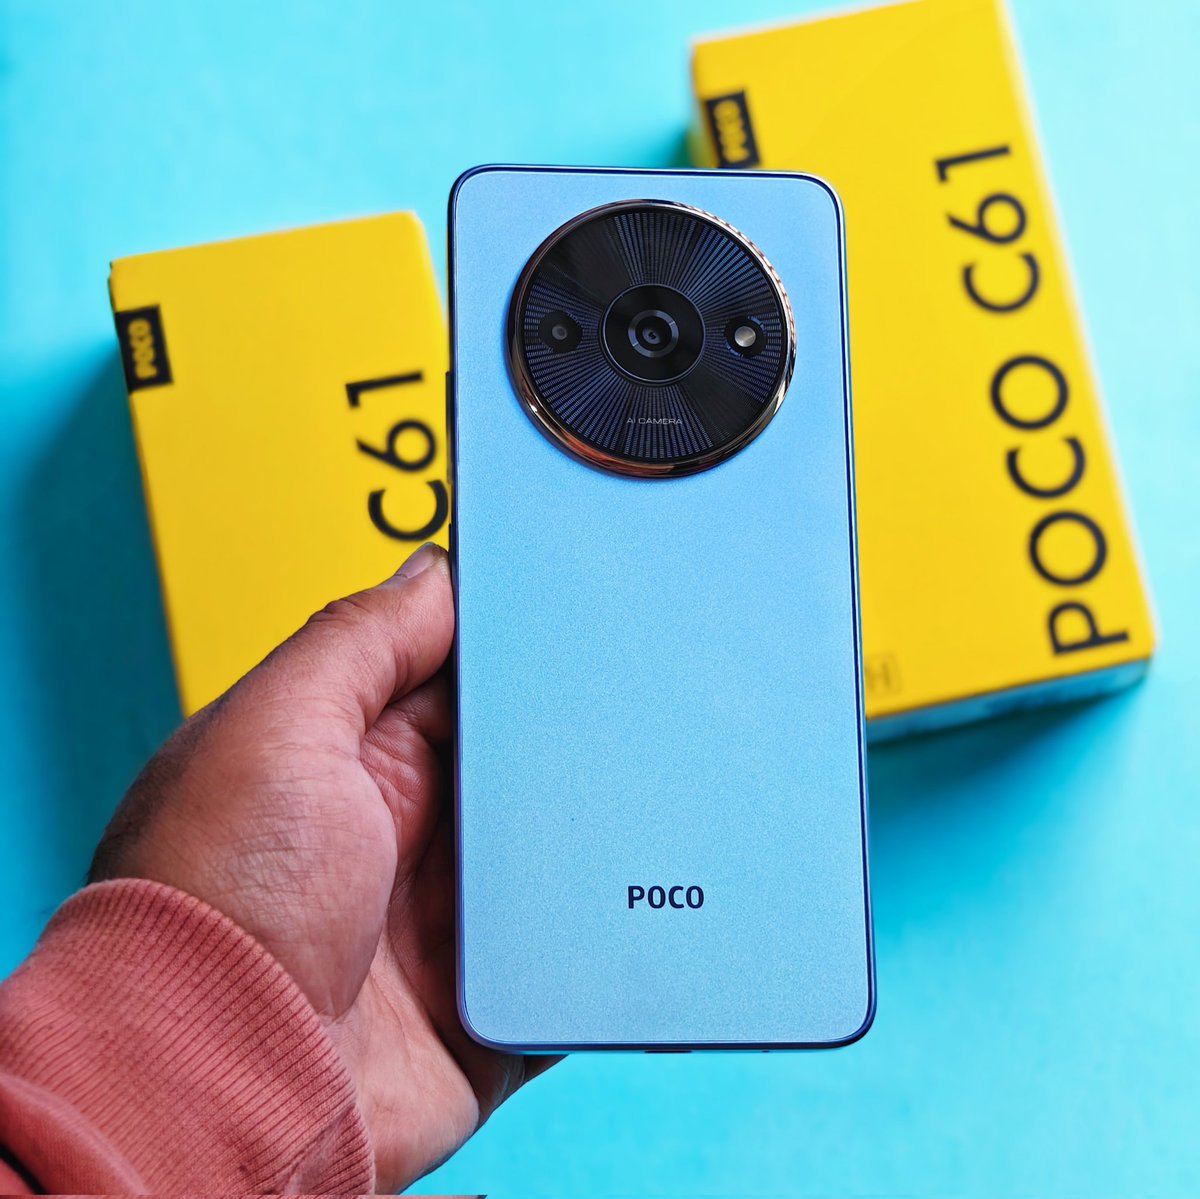 It's Giveaway Time!! Two of you get the all new POCO C61. Comes with Radiant Ring Design, 90Hz display & more. To win: - Repost this using #POCOC61 & #BeyondStunning - Share why you want to win the POCO C61 - Tag 4 friends - Follow @heyitsyogesh, @Himanshu_POCO & @IndiaPOCO